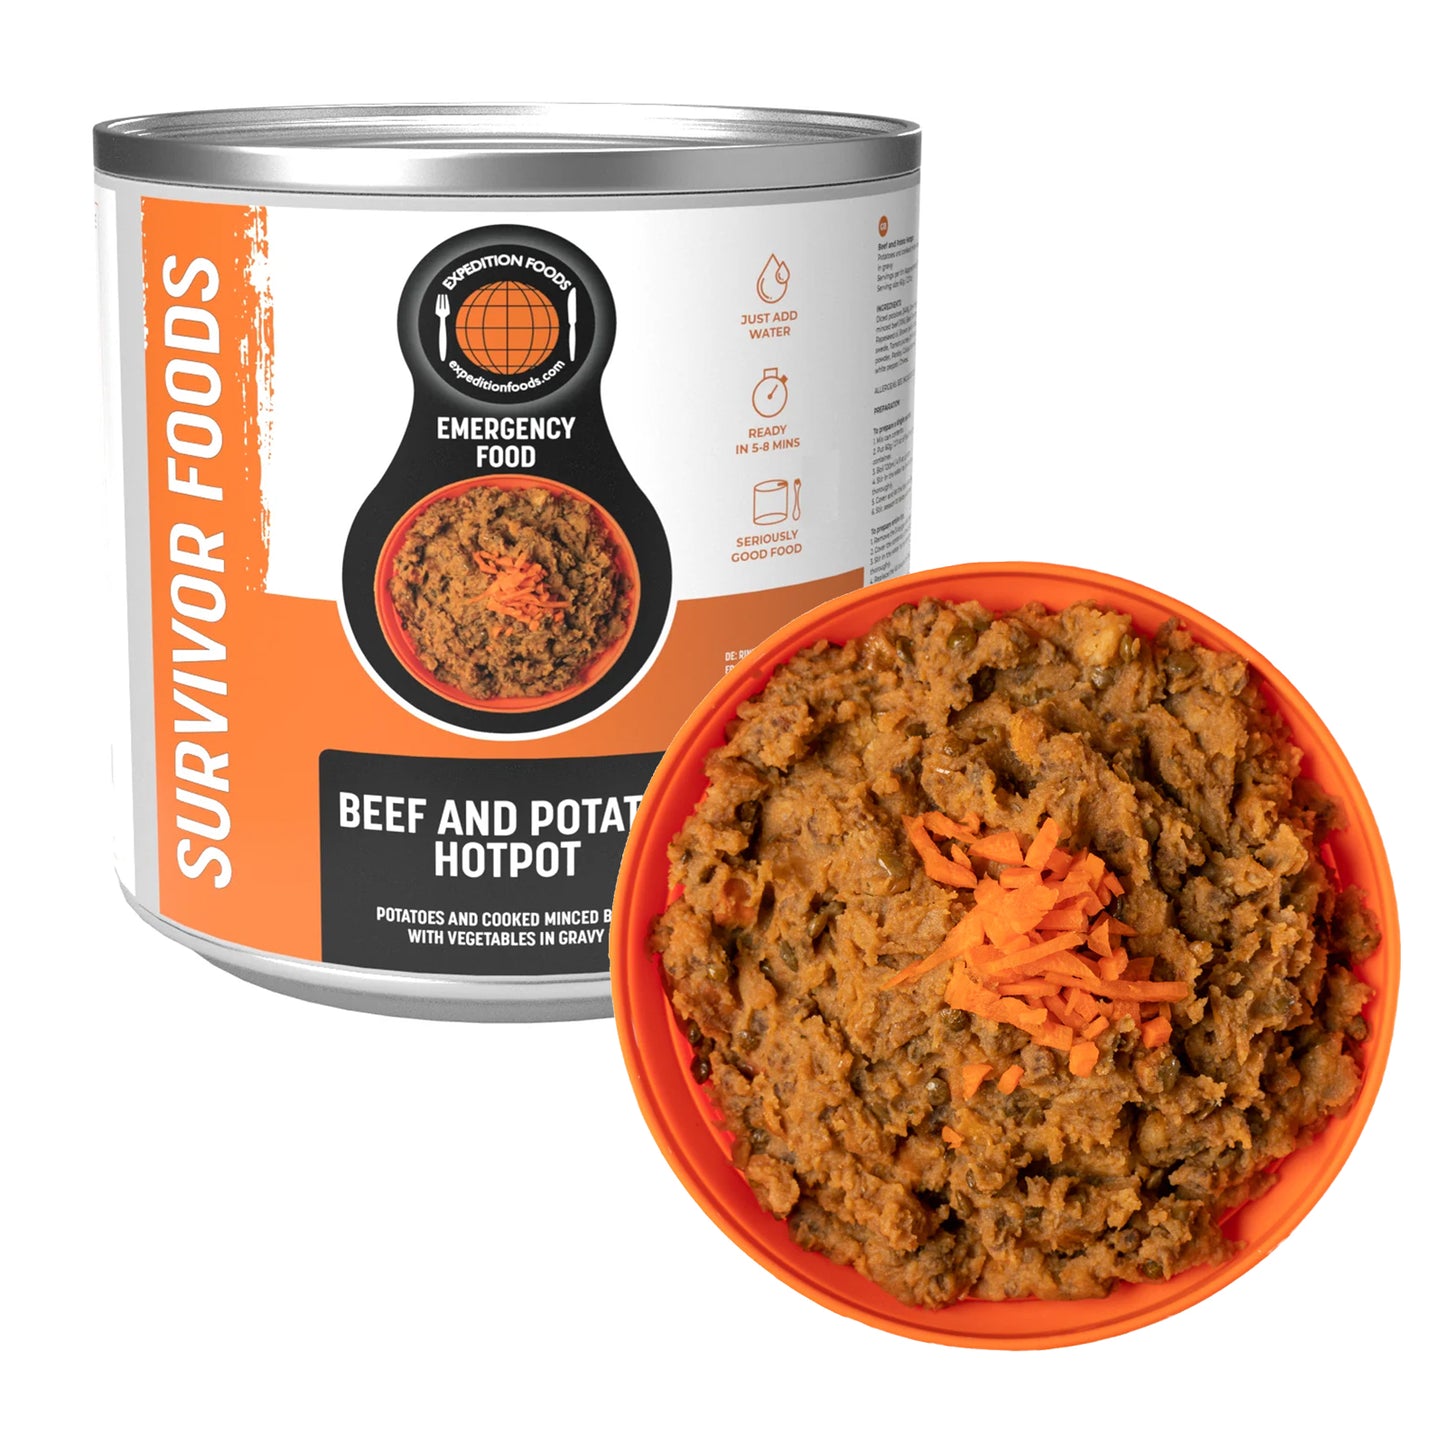 Expedition Foods Beef and Potato Hotpot Meal Long Life